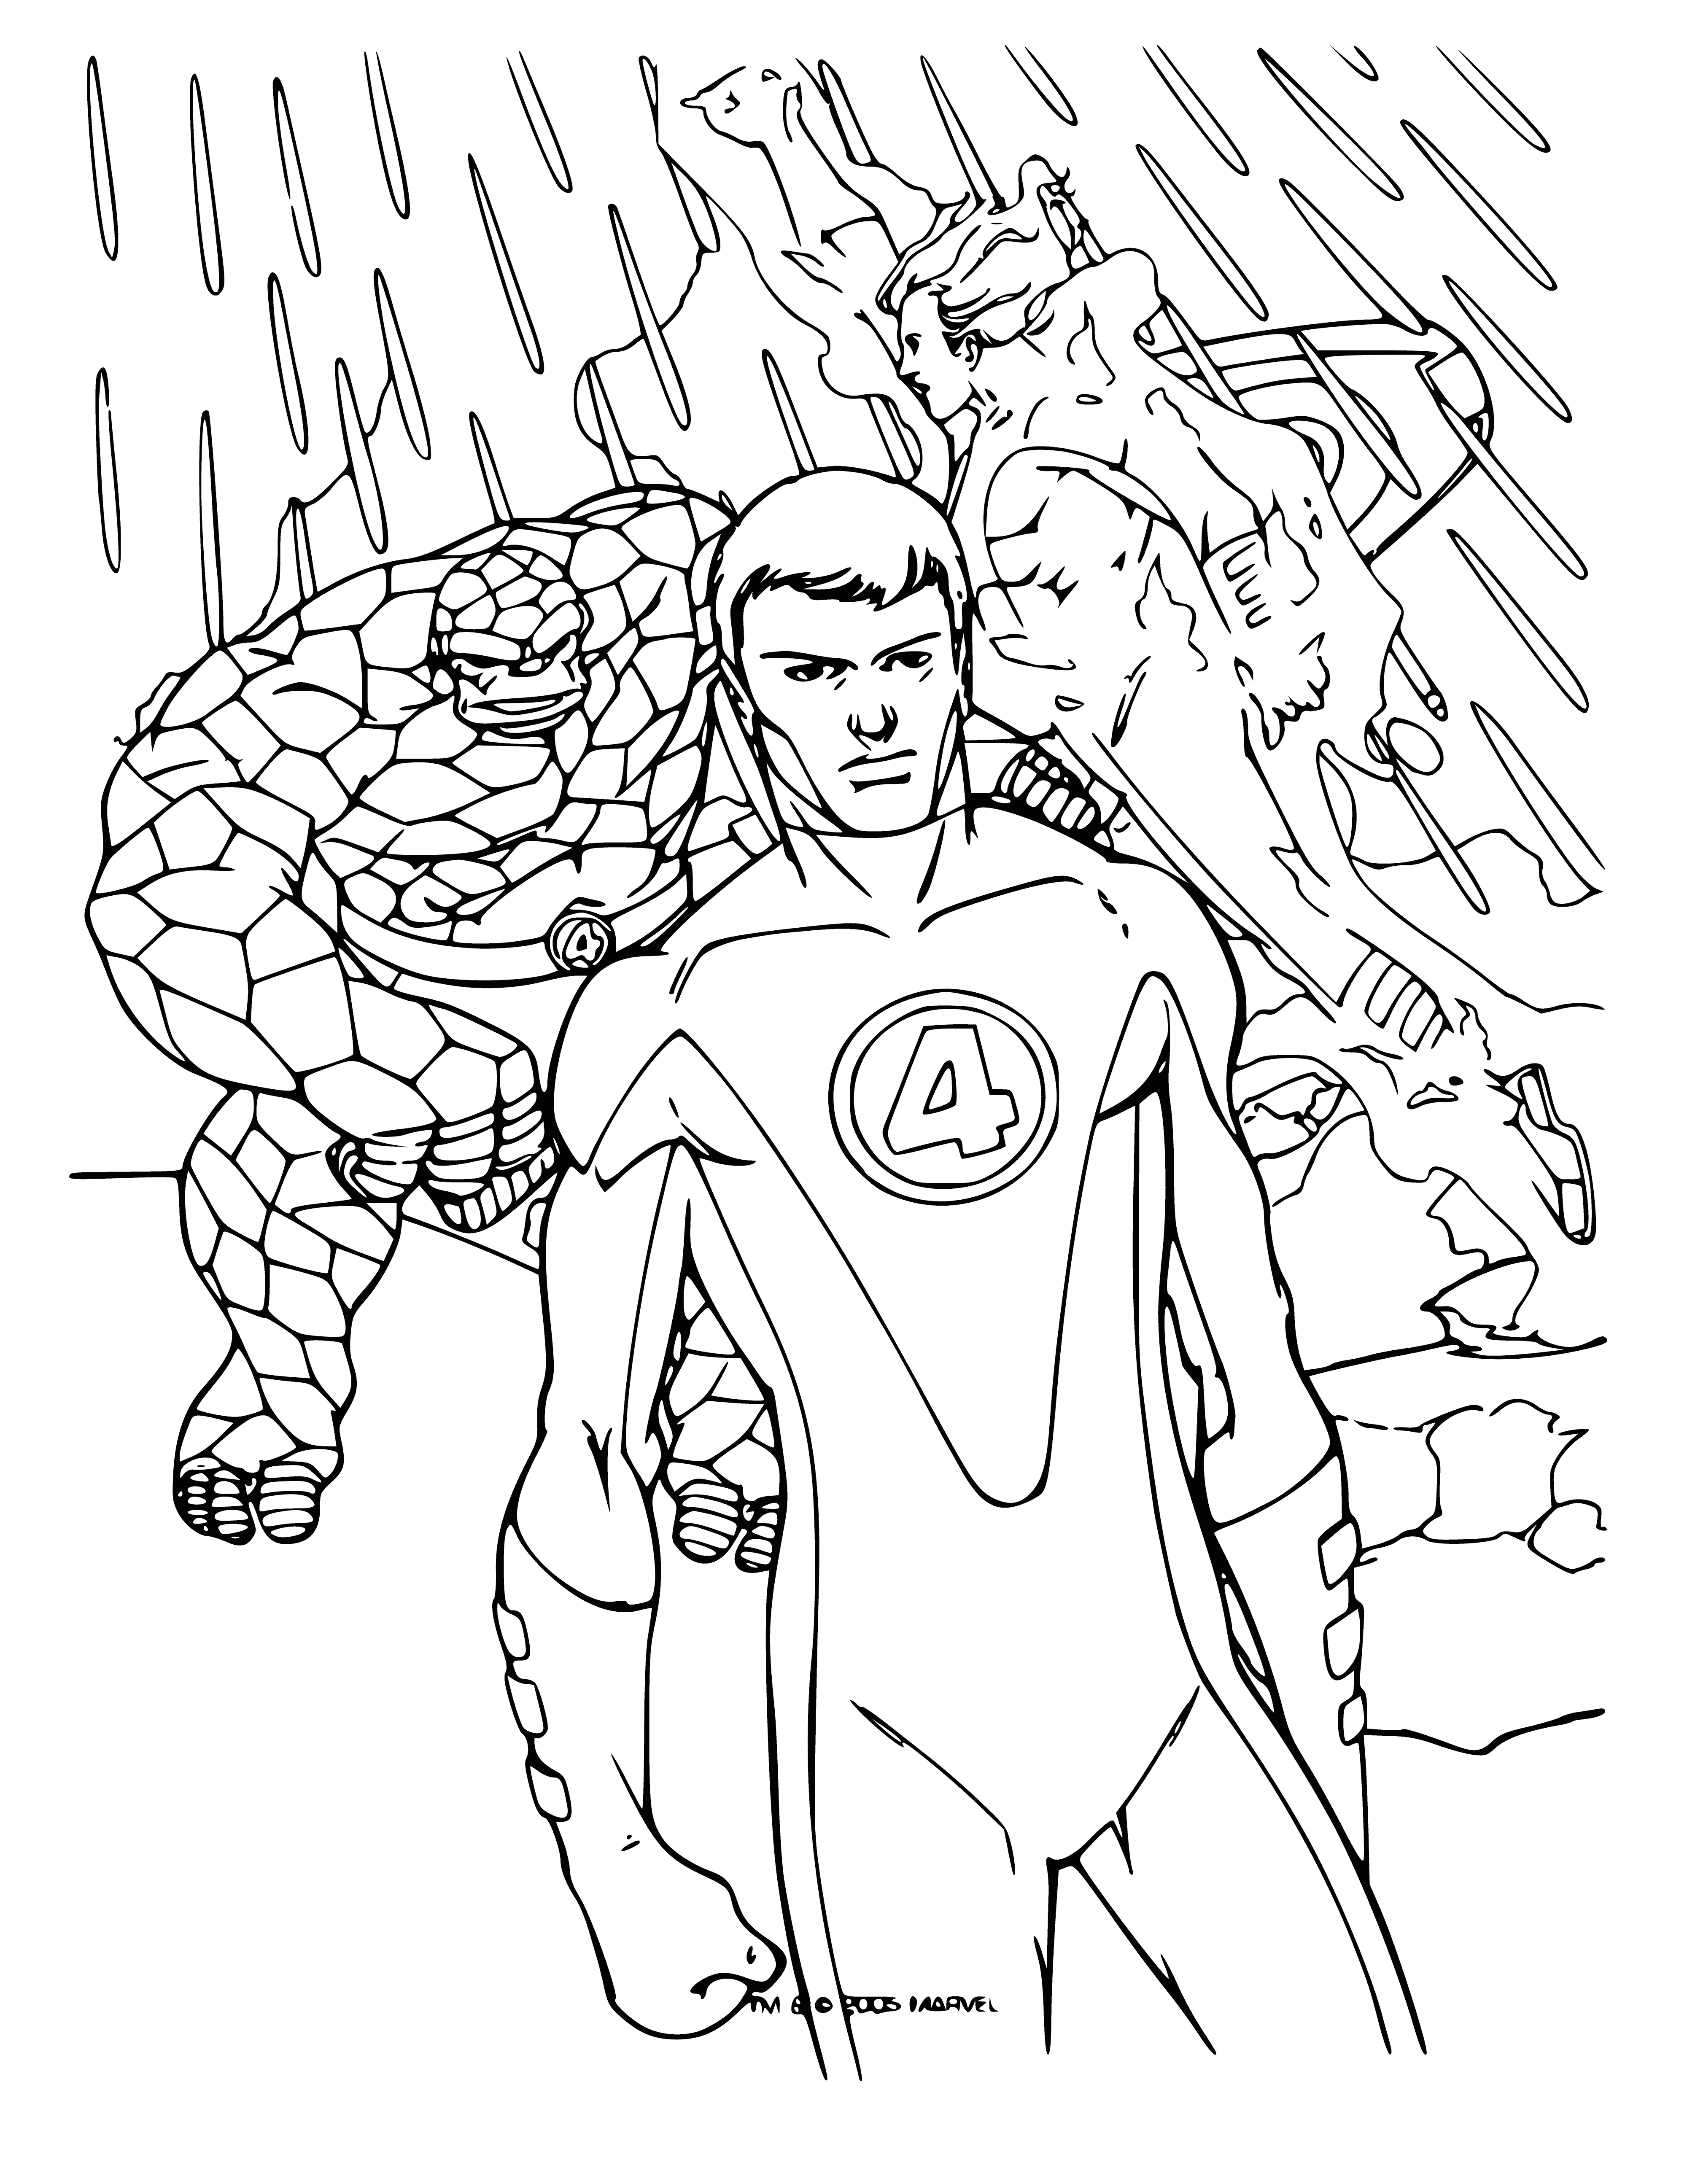 coloring page: The Fantastic Four use their unique powers to protect the world from evil and save it from destruction. Mr. Fantastic, Invisible Woman, Human Torch, and the Thing make up the heroic team.